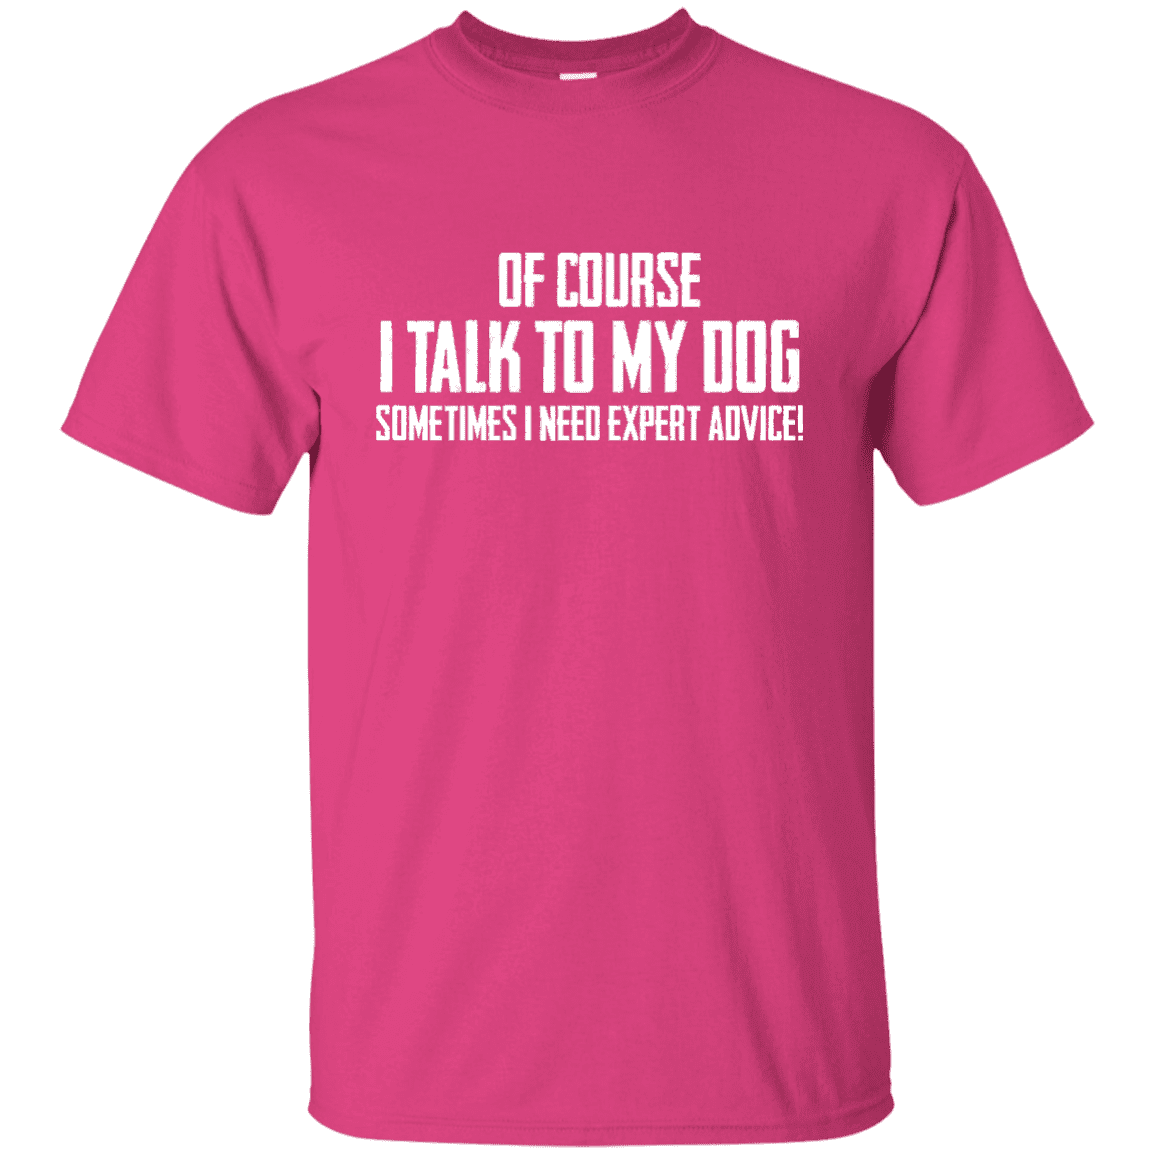 Of Course I Talk To My Dog - T Shirt.